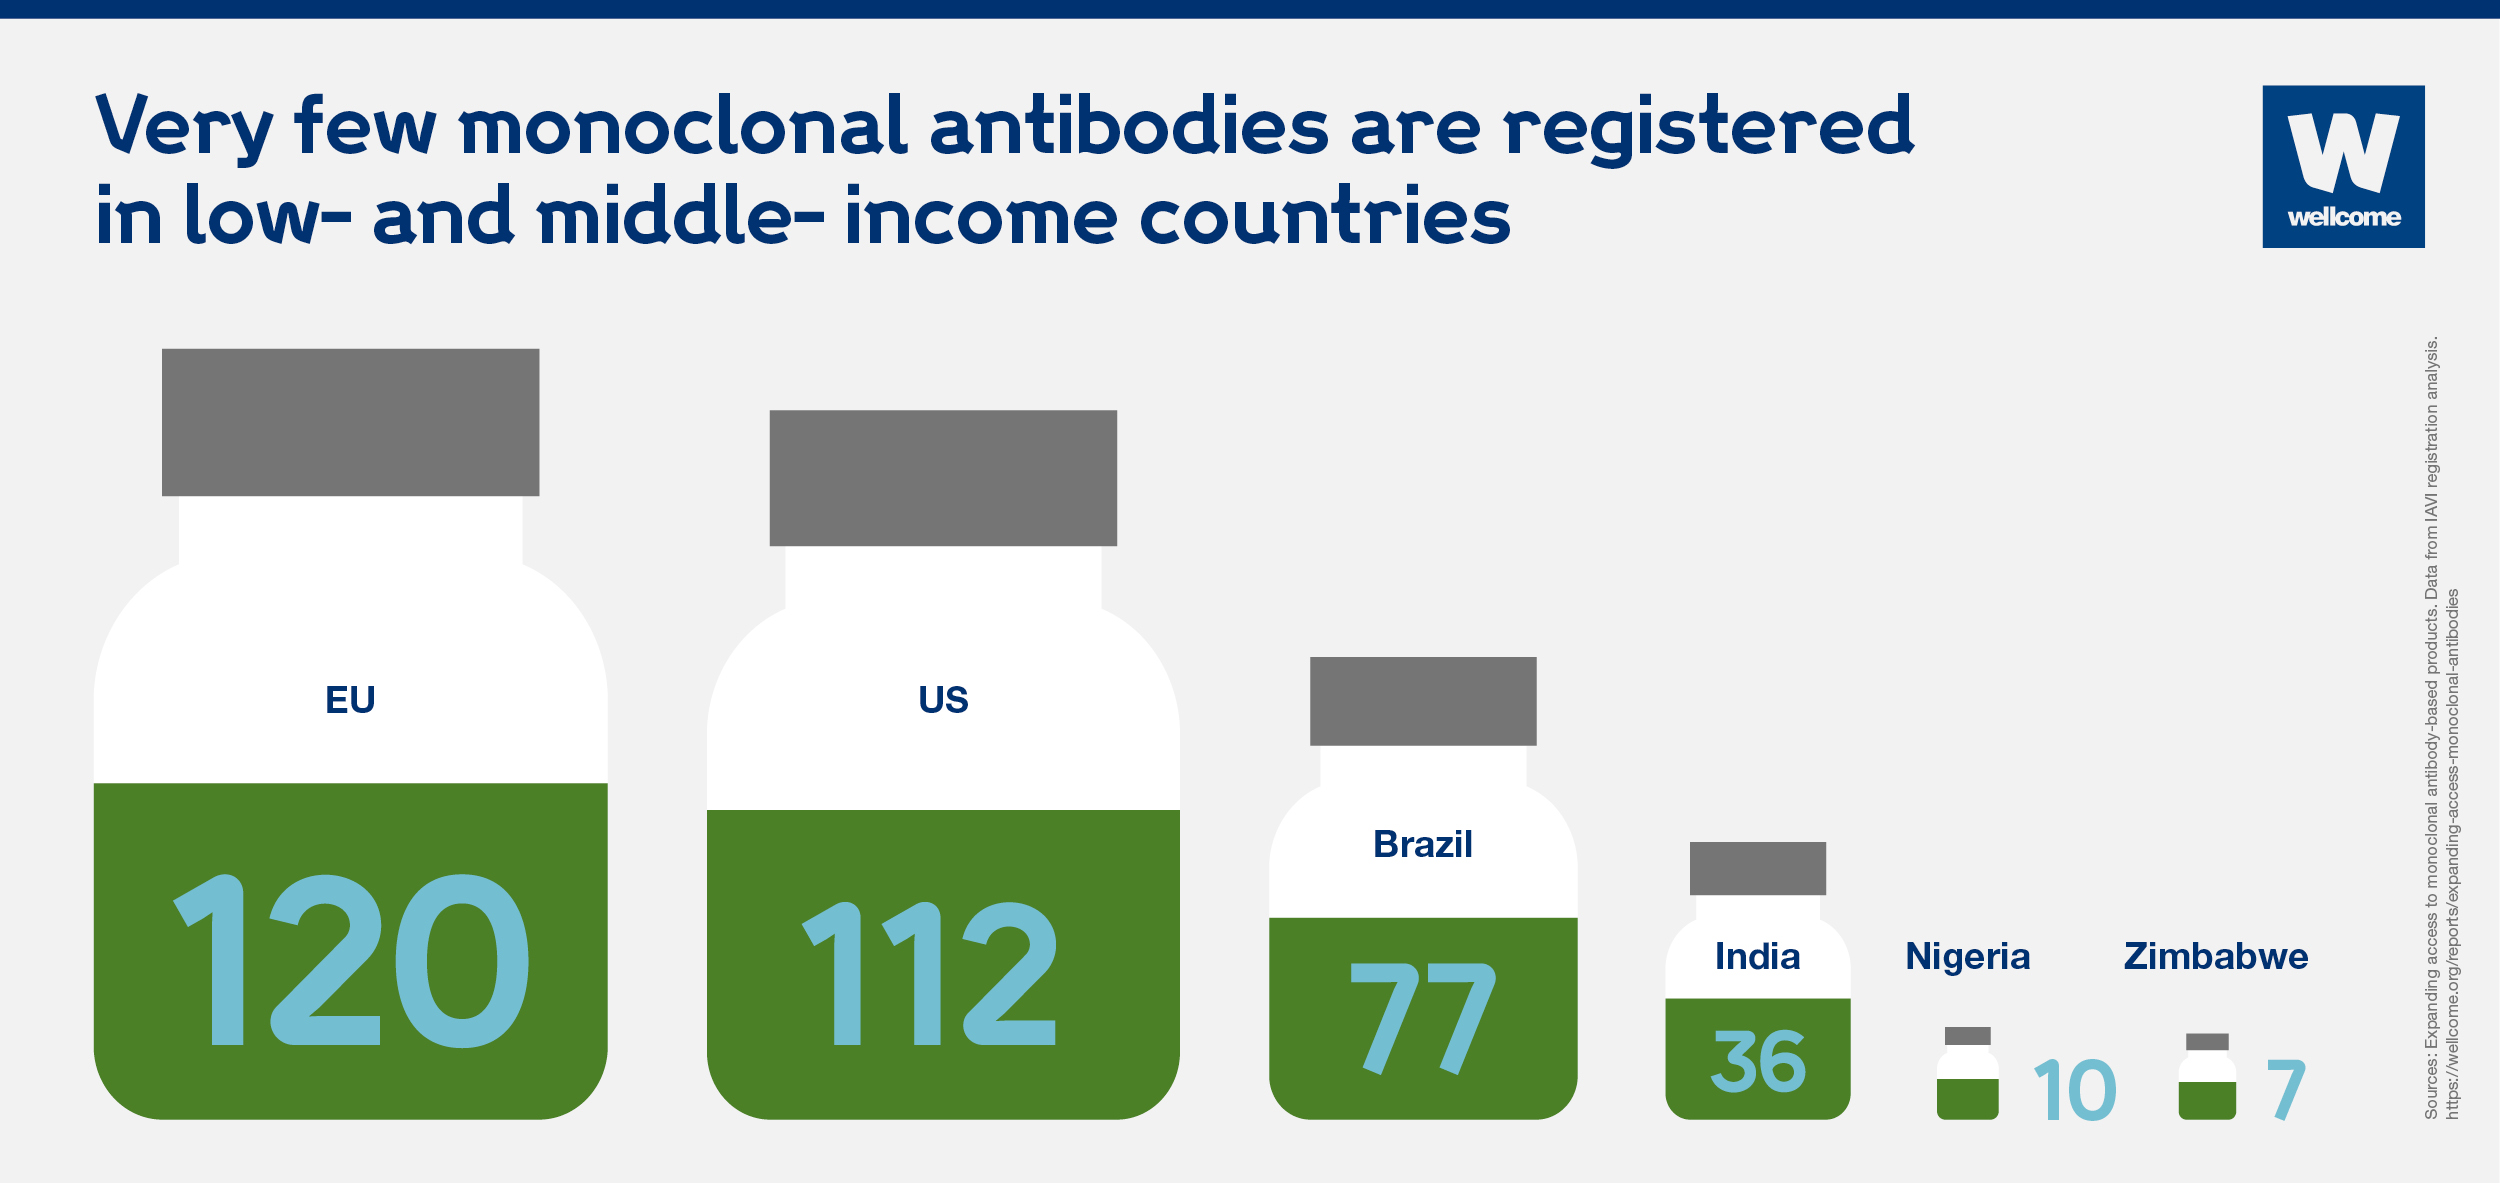 Graphic showing the number of monoclonal antibodies registered in a few selected countries.